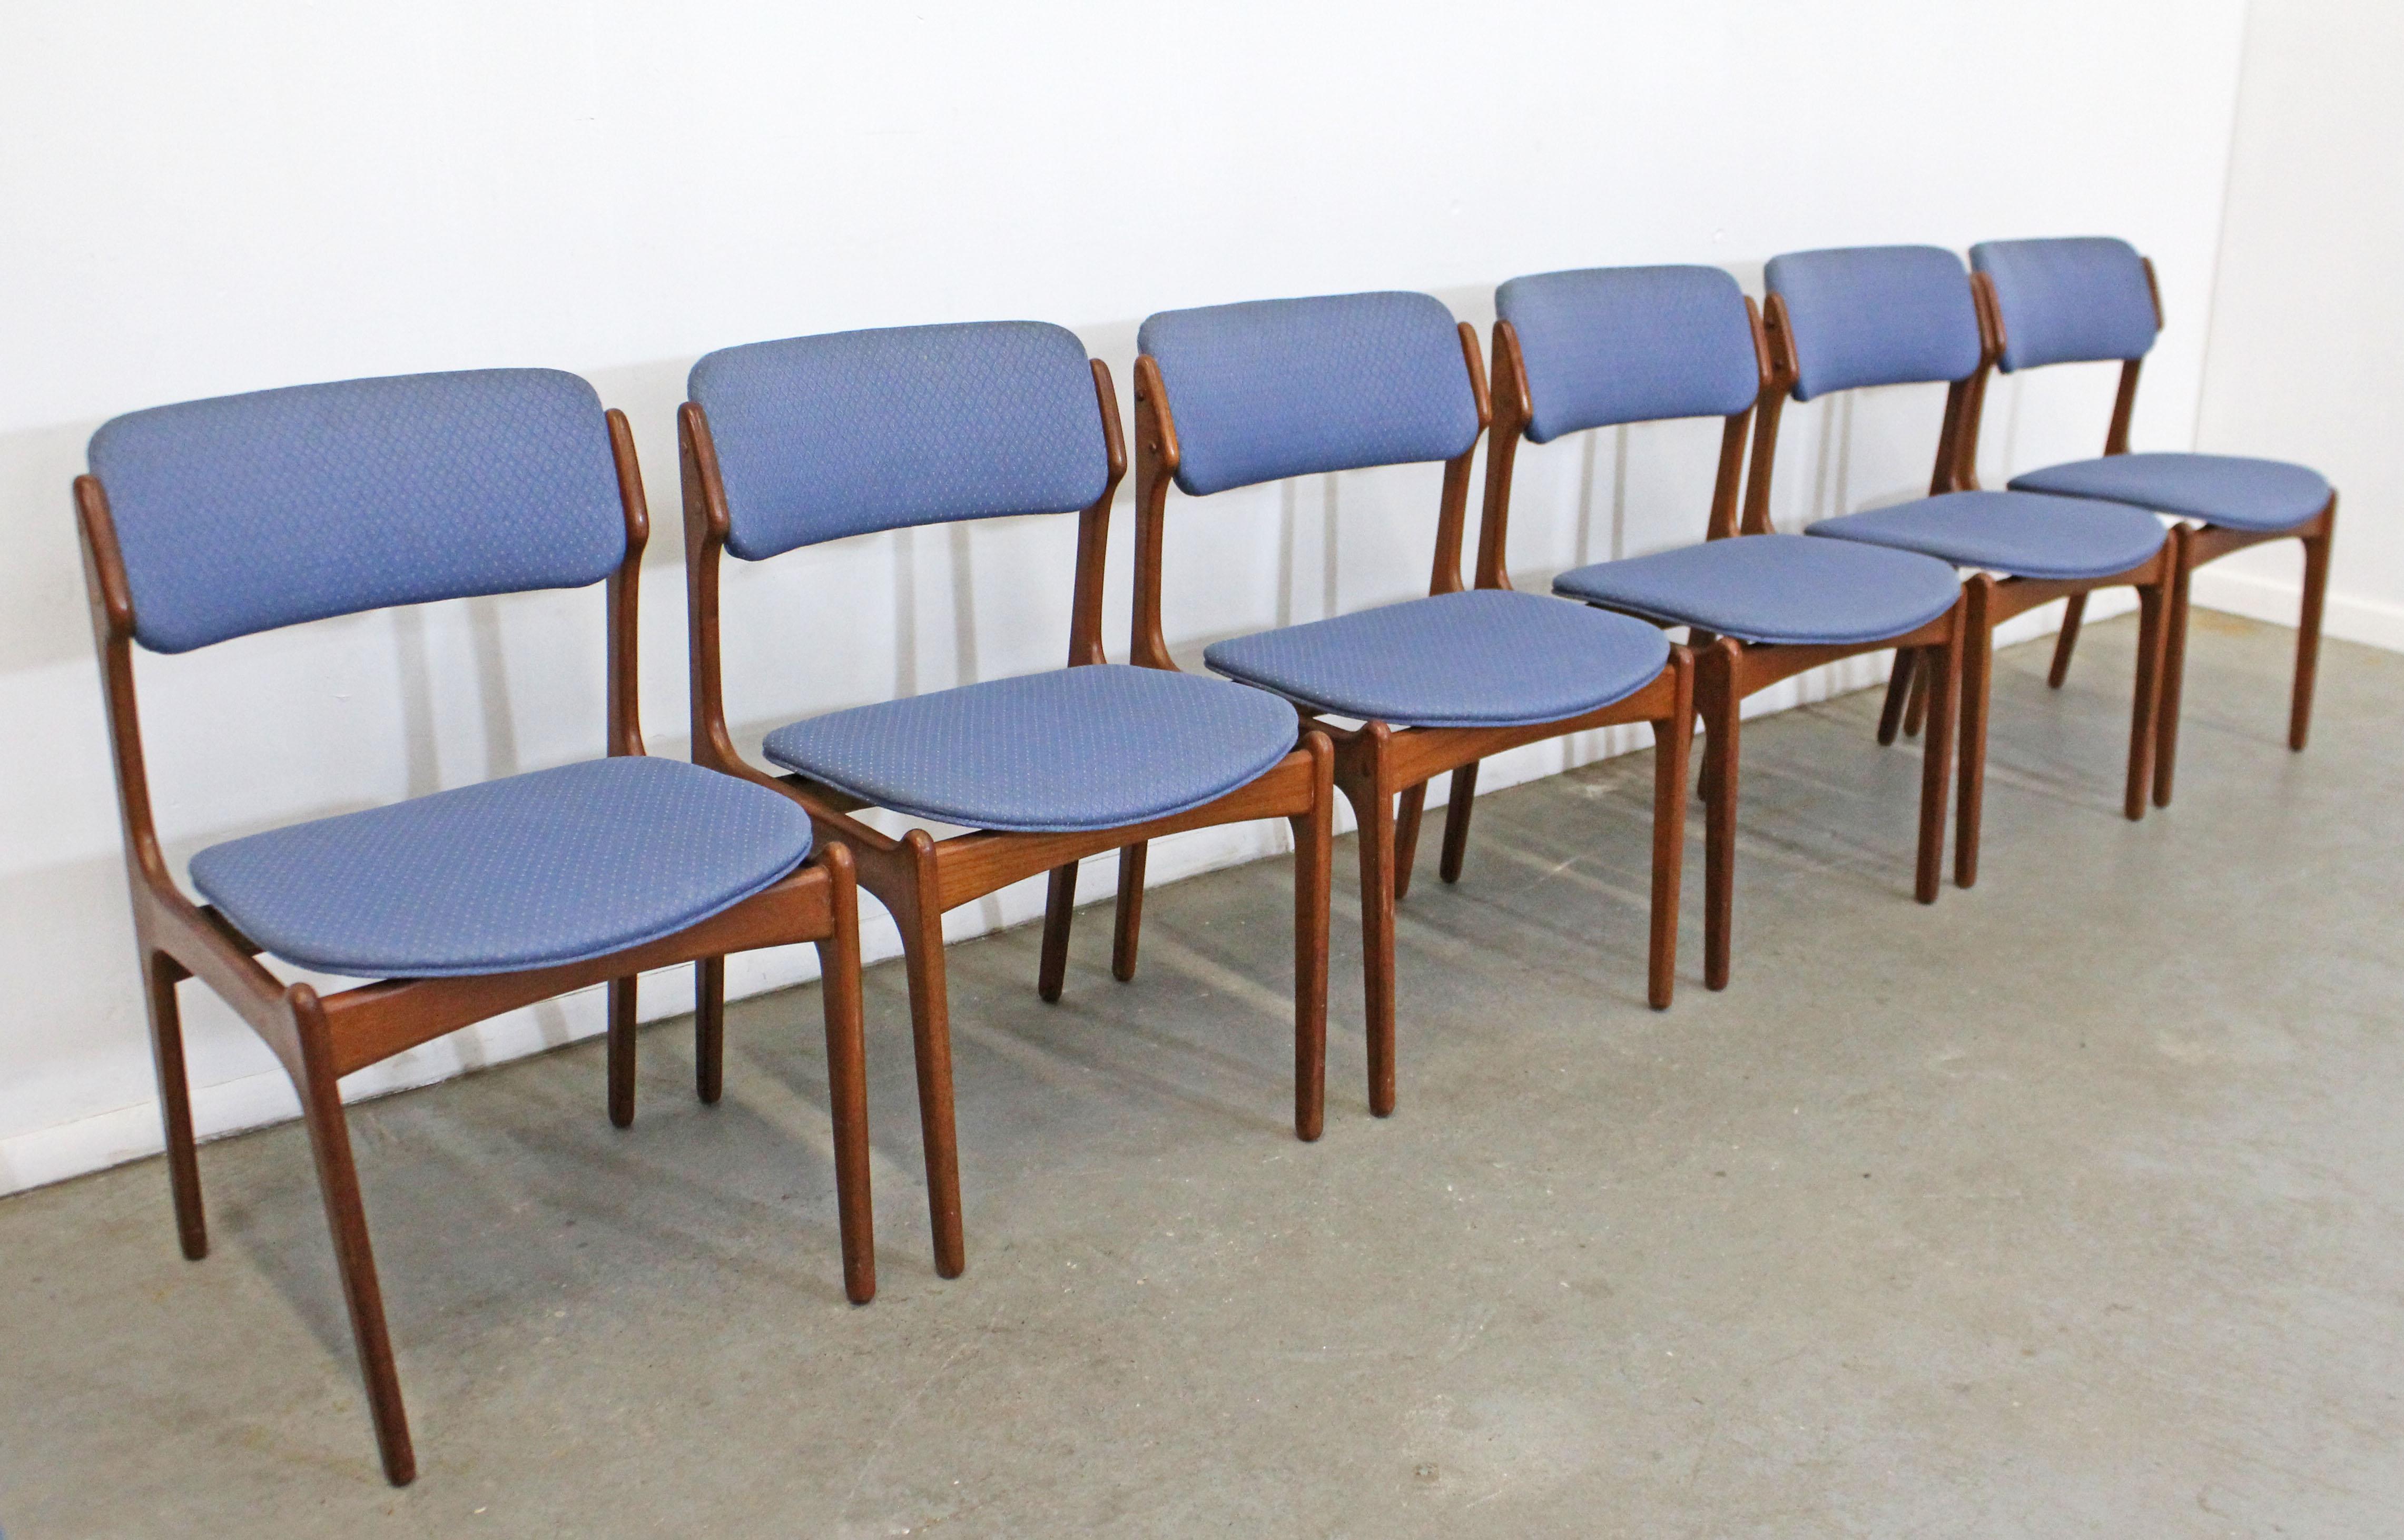 Offered is a vintage set of 6 Danish modern dining chairs, designed by Erik Buch for O.D. Mobler. These chairs have elegant lines and 'floating' seats with teak bases and upholstered seats/backs. They are in good vintage condition with some age wear